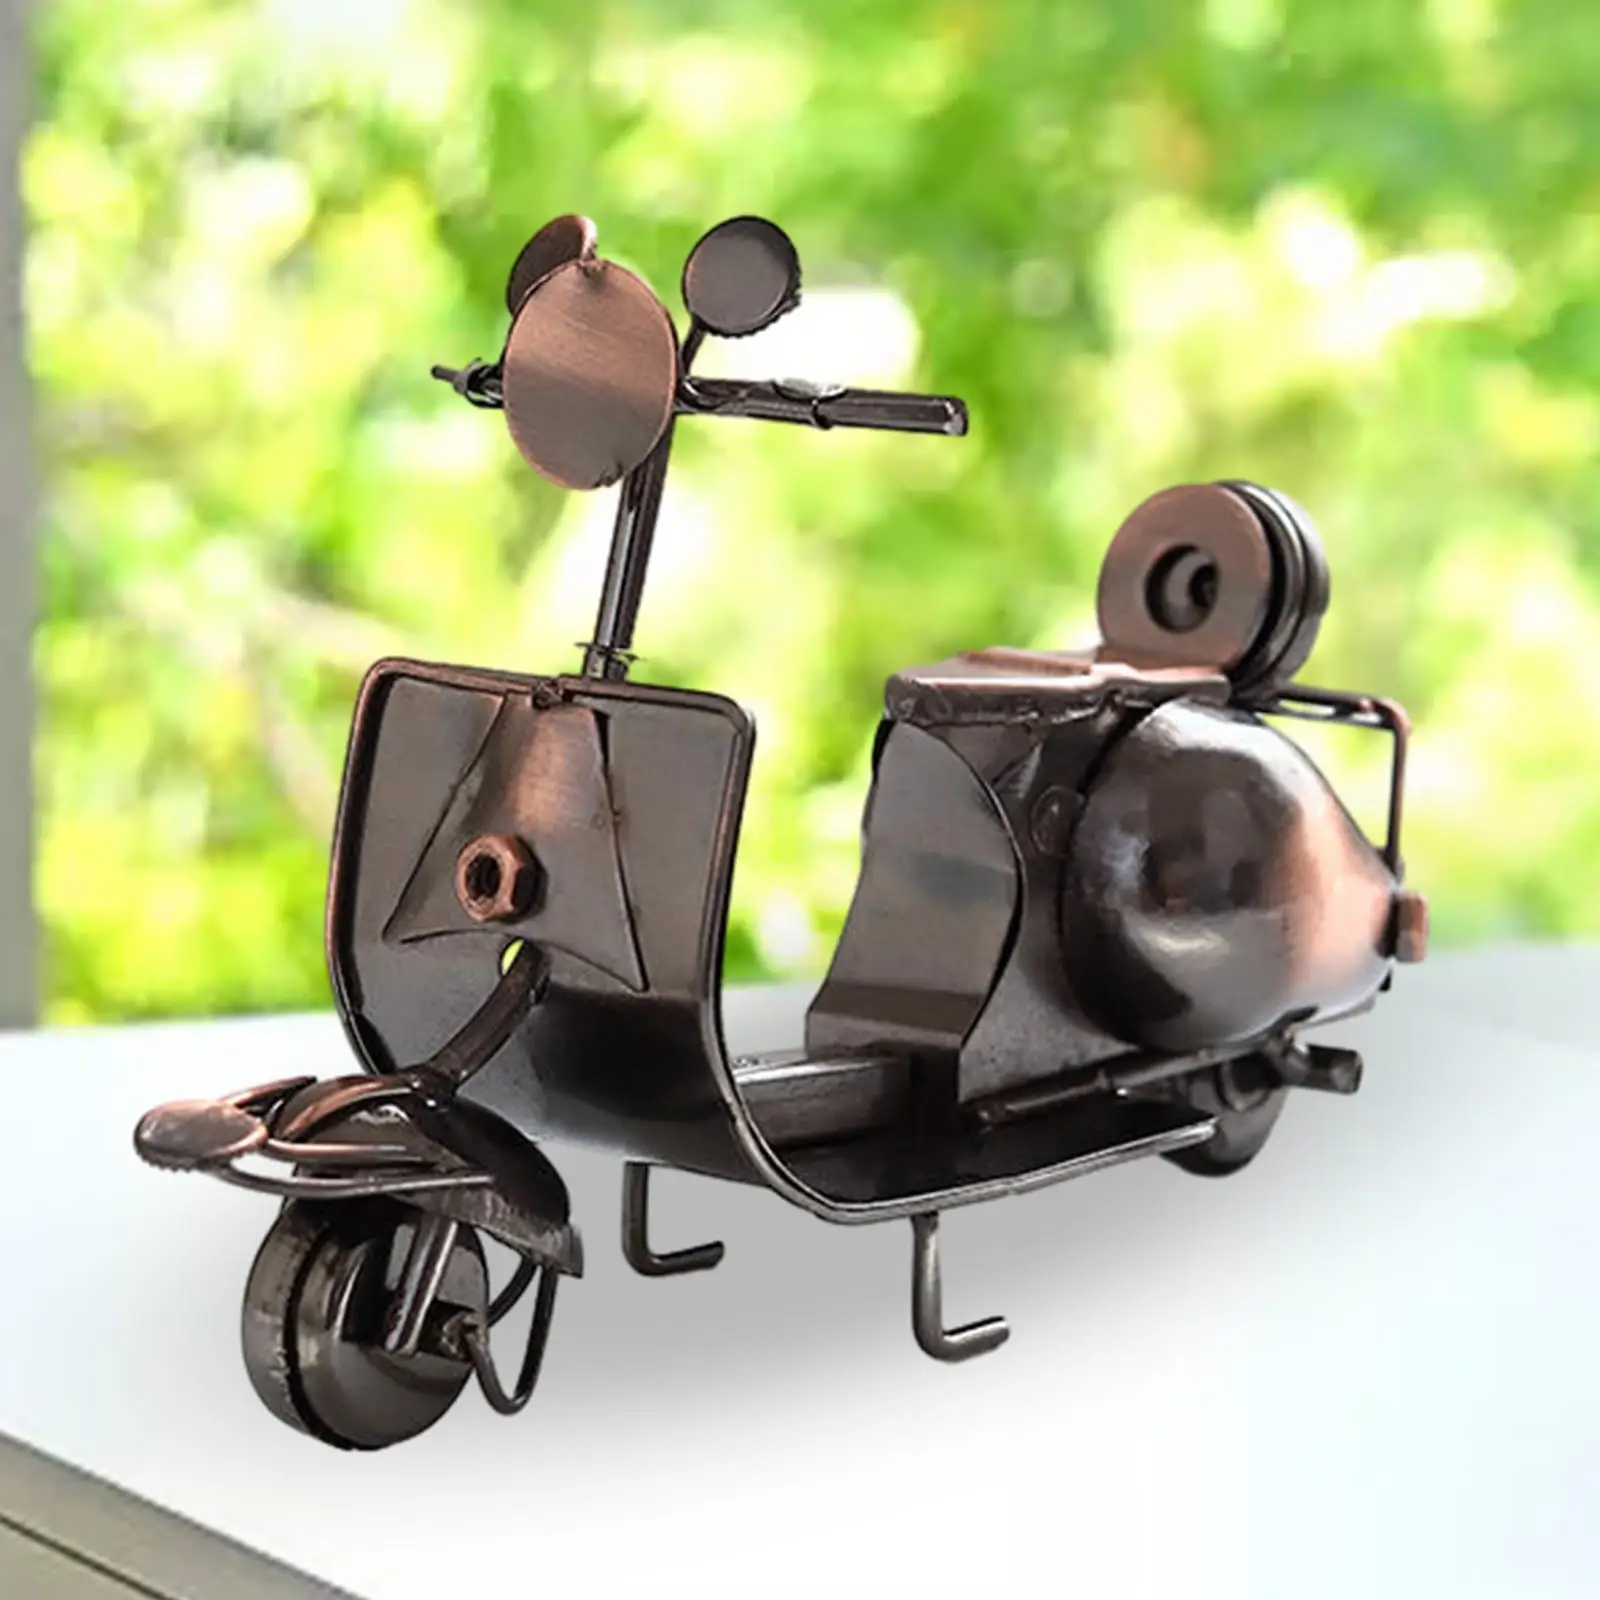 Metal Motorcycle Model Motorcycle Sculpture Decor Retro Style Birthday Gift Collection for Desktop Home Bookshelf Office Son